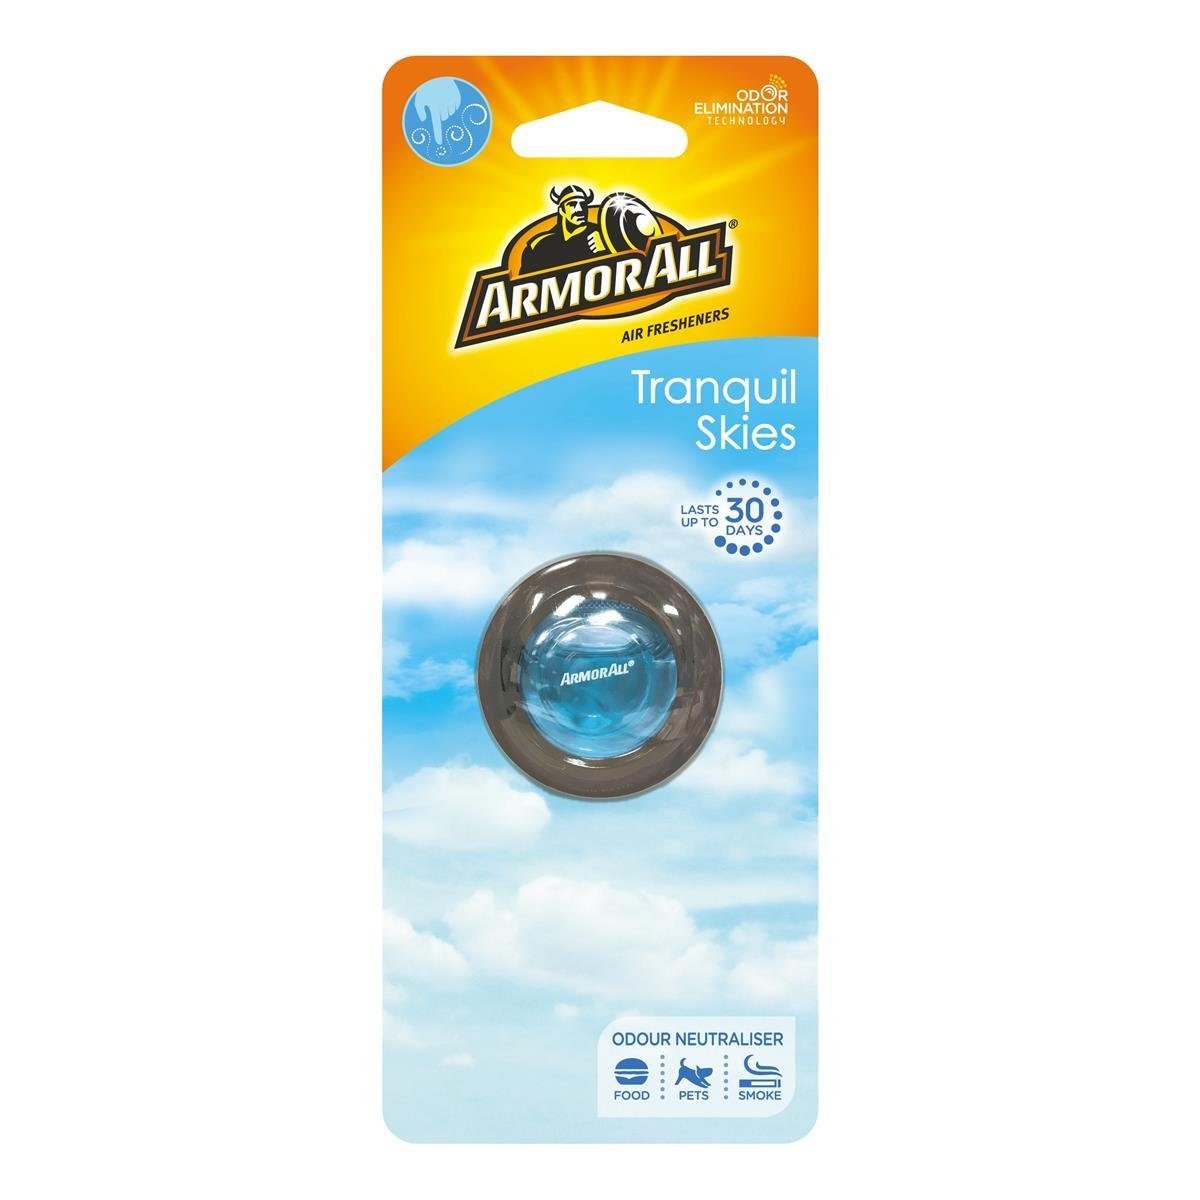 Armor All Raumduft Armor All Air Fresheners Tranquil Skies 2,5ml (1er Pack)